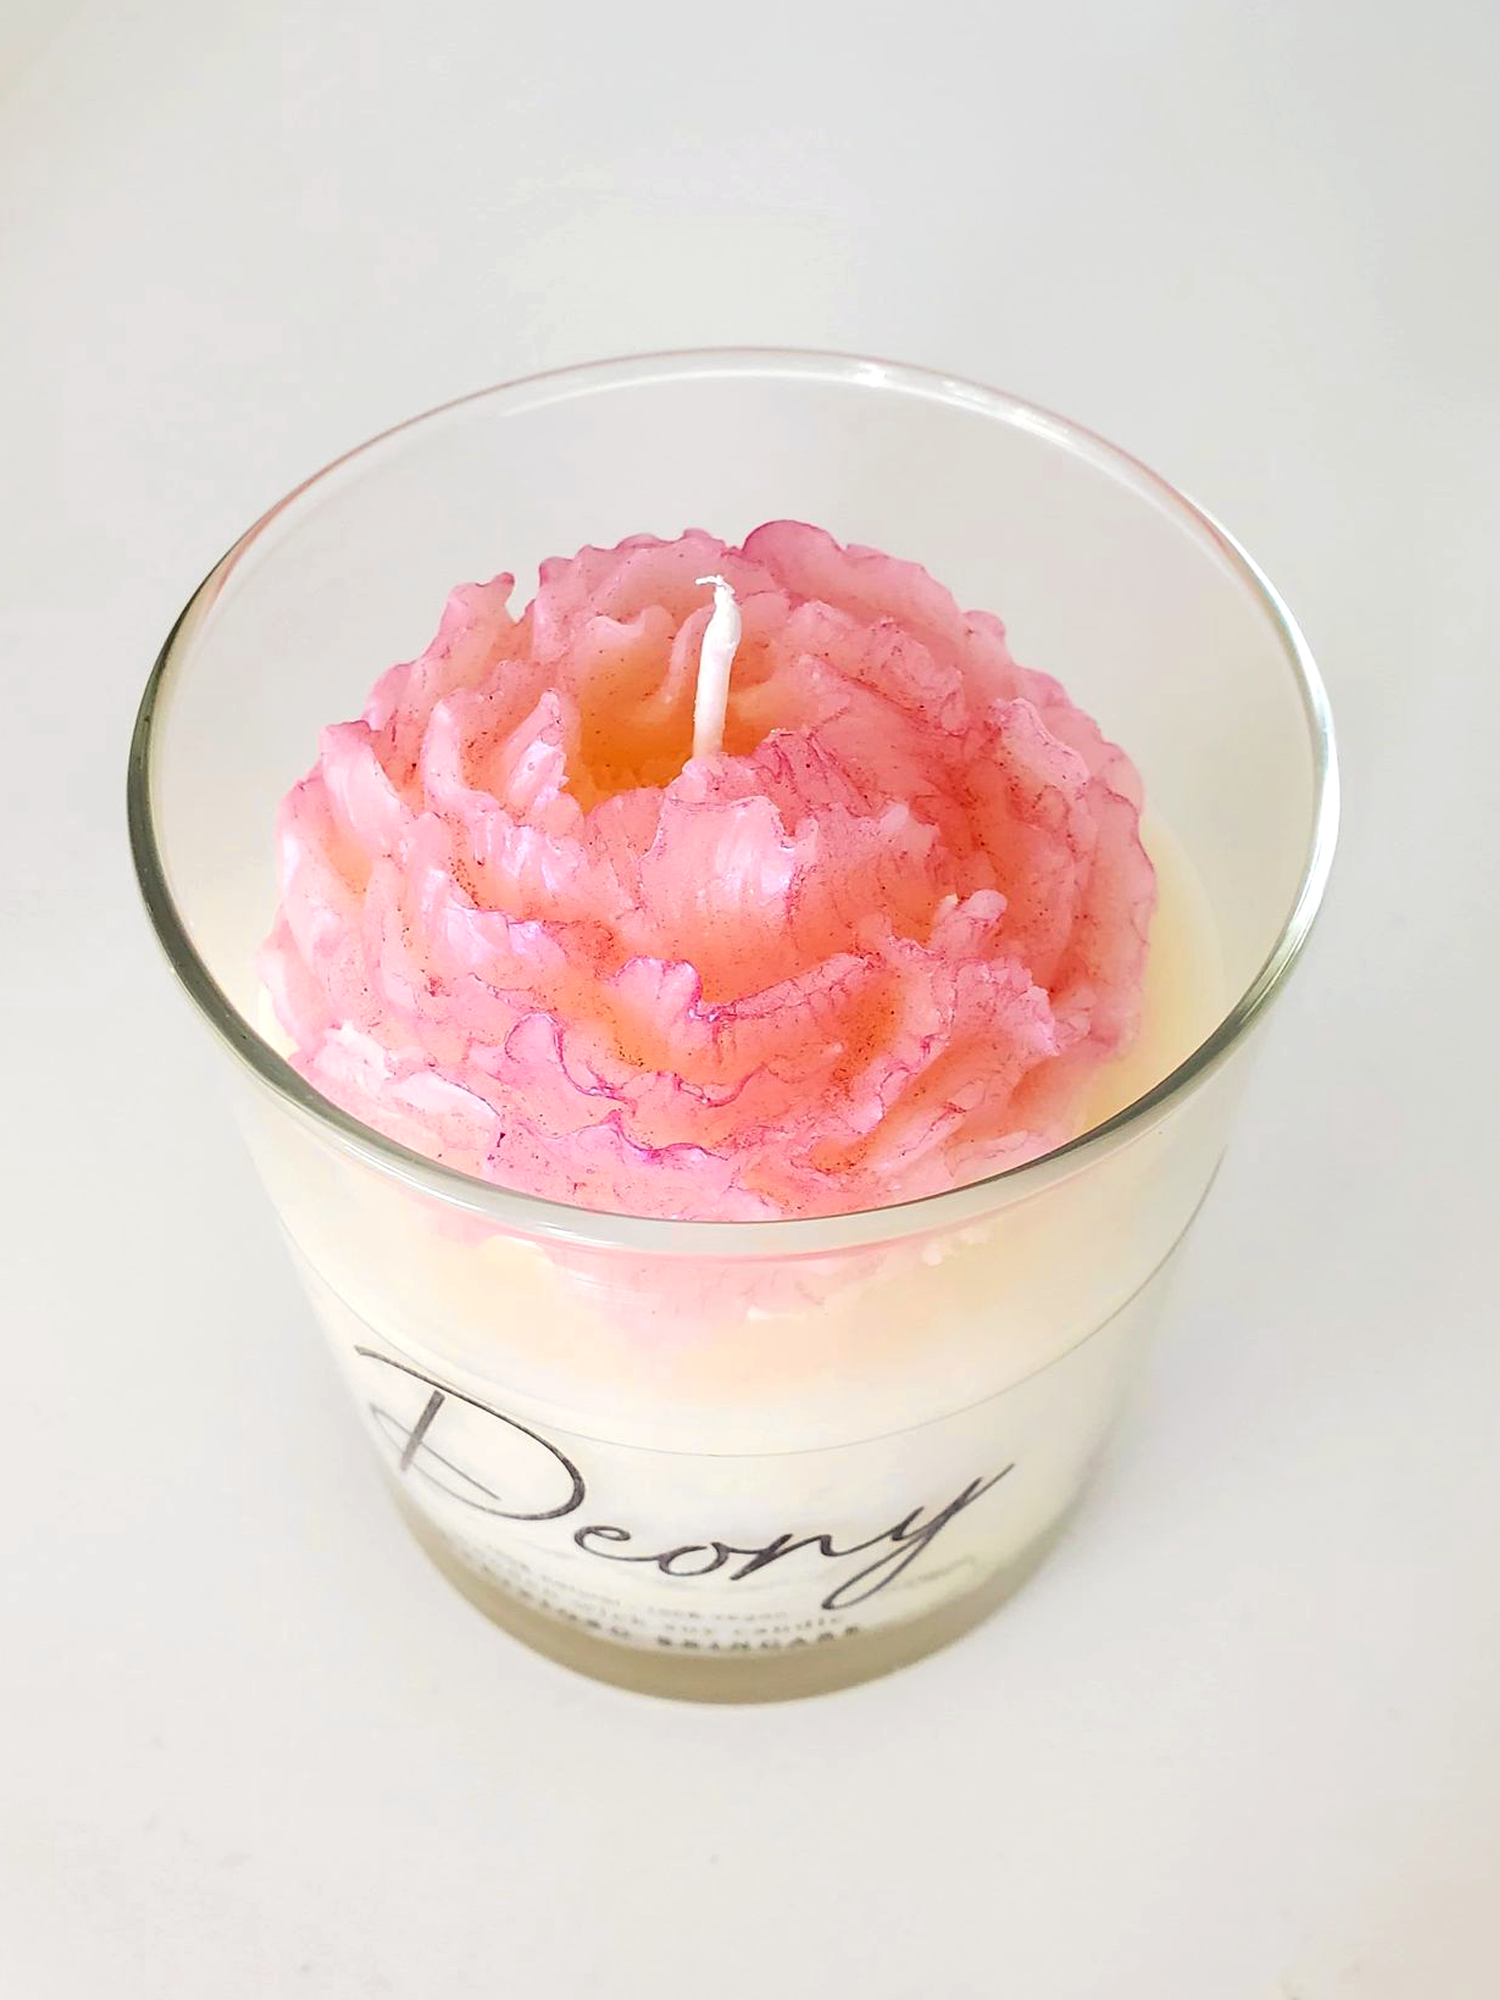 Peony Blooming Eco Wick Soy Candle